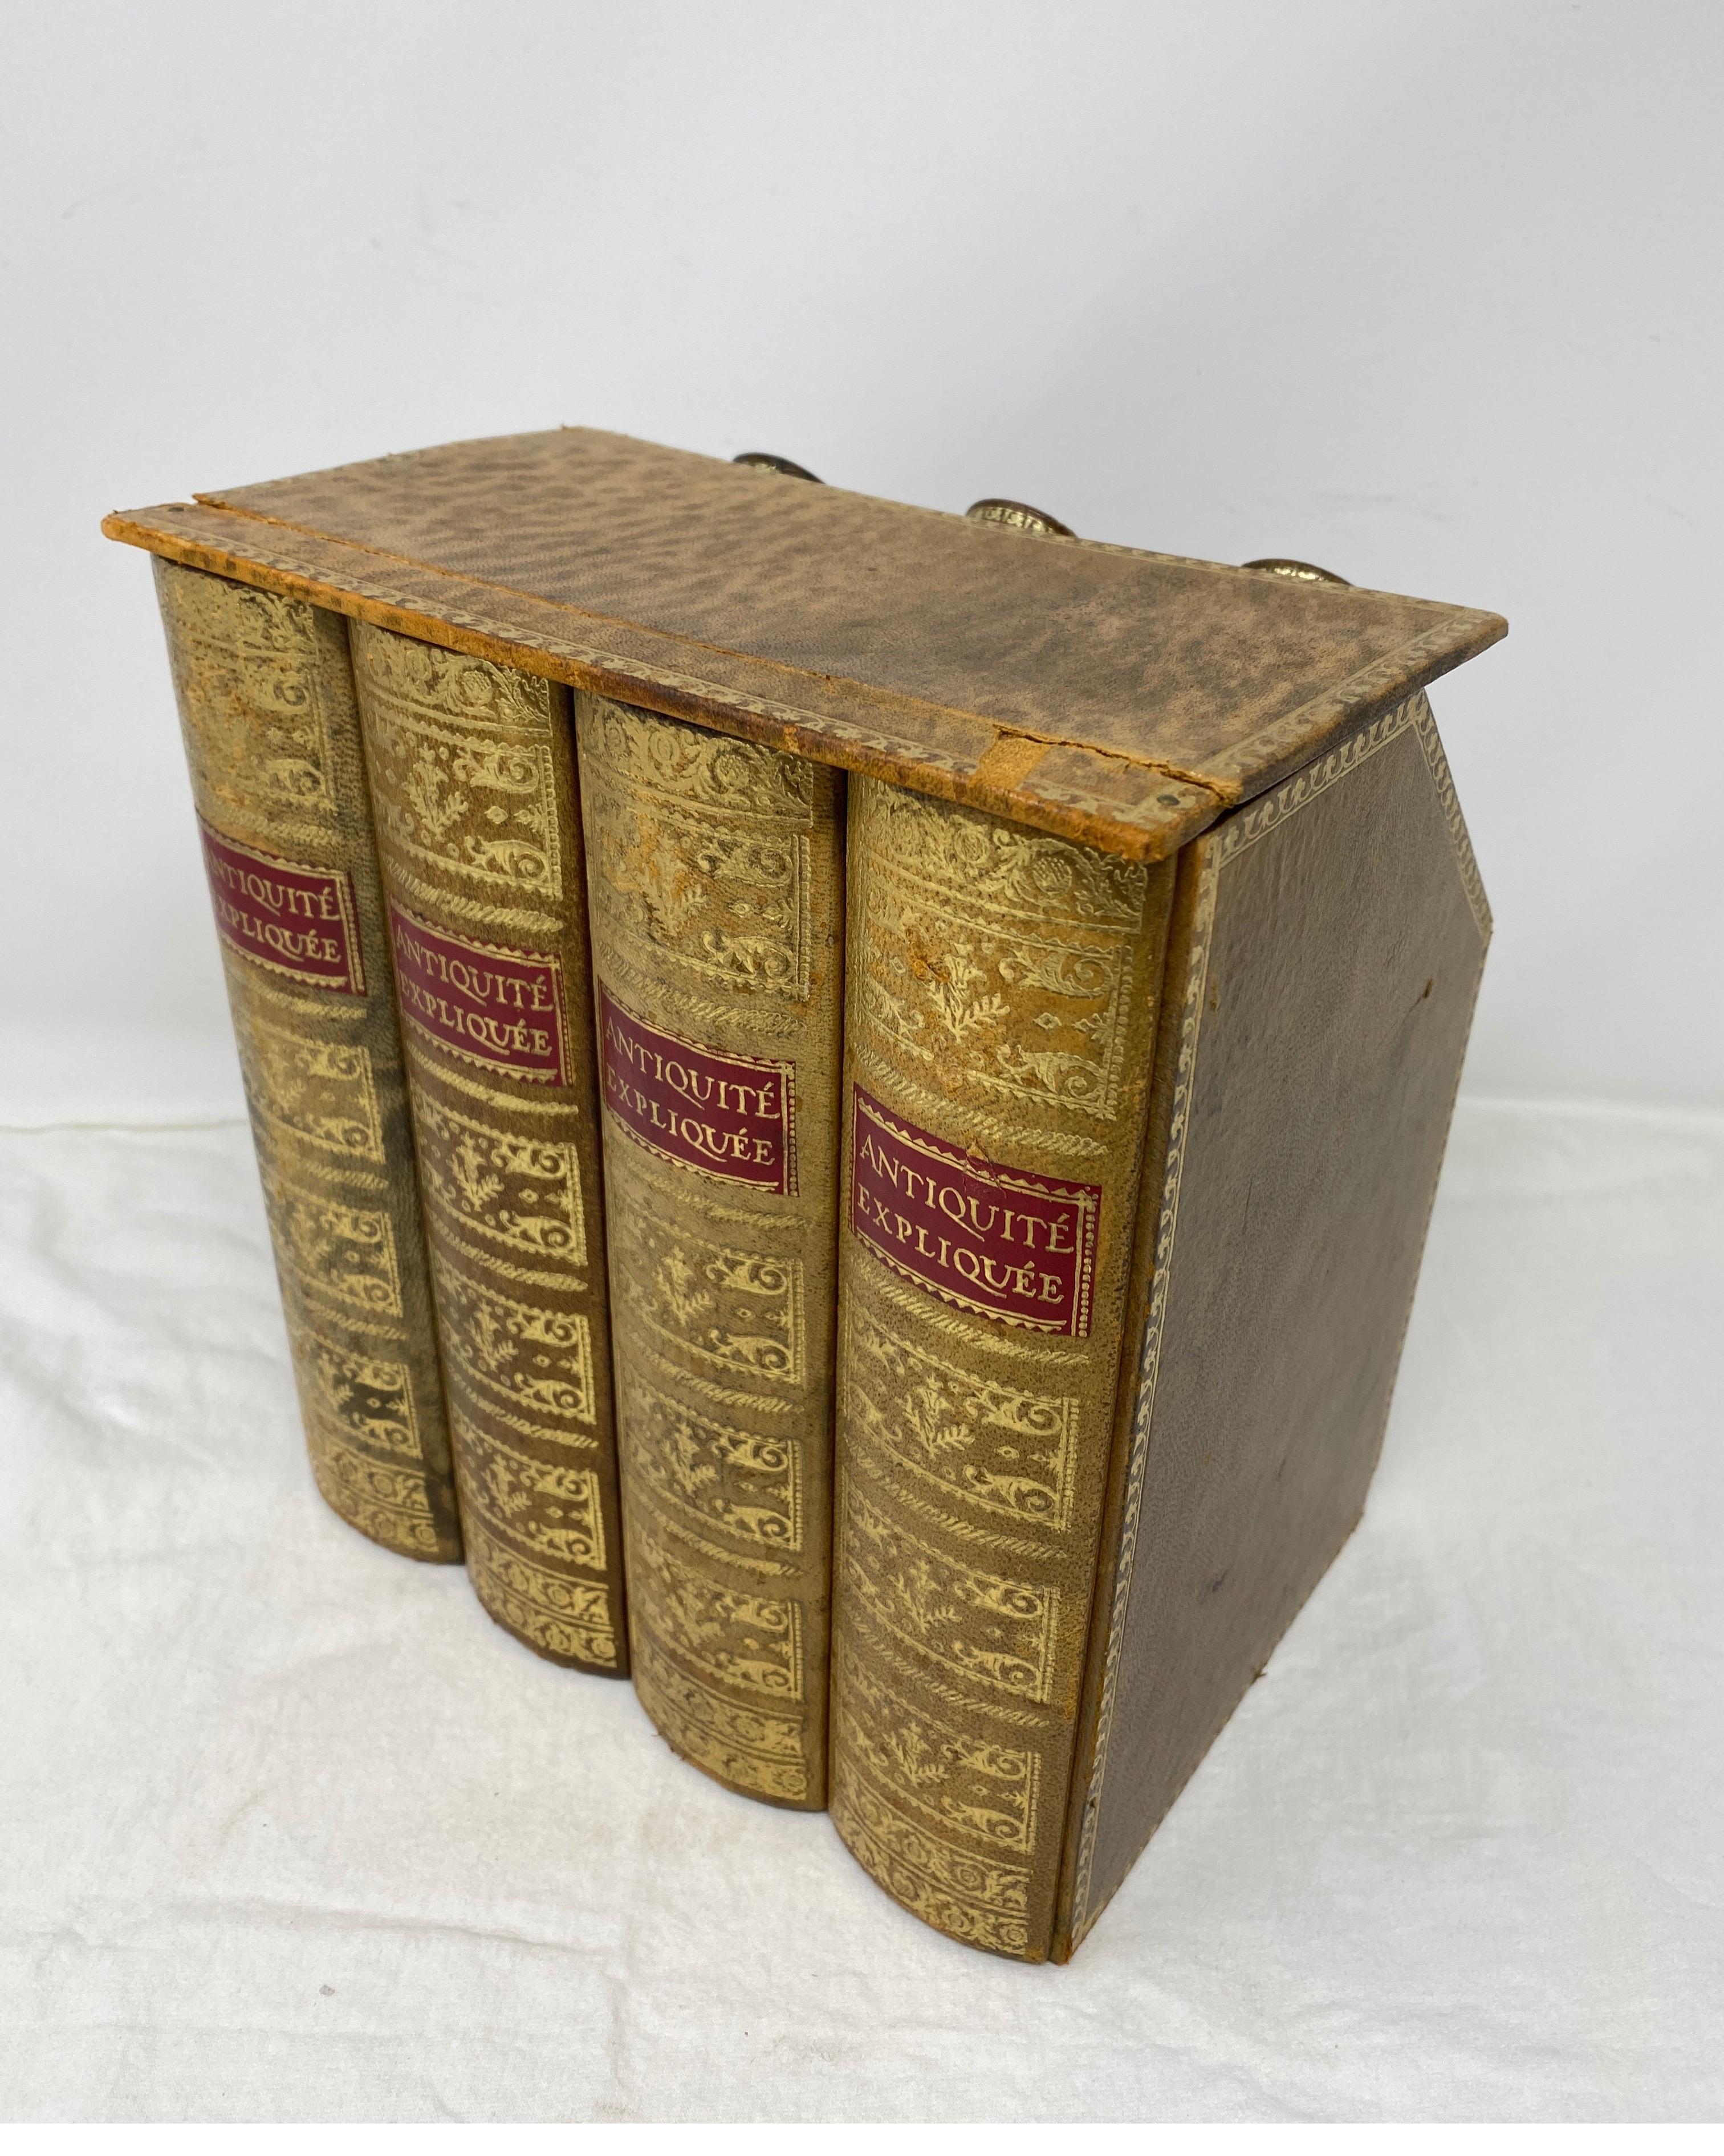 Collectible faux books with hidden flasks. The faux books reveal three amber colored bottles typically used to conceal alcohol. The back side has the words 